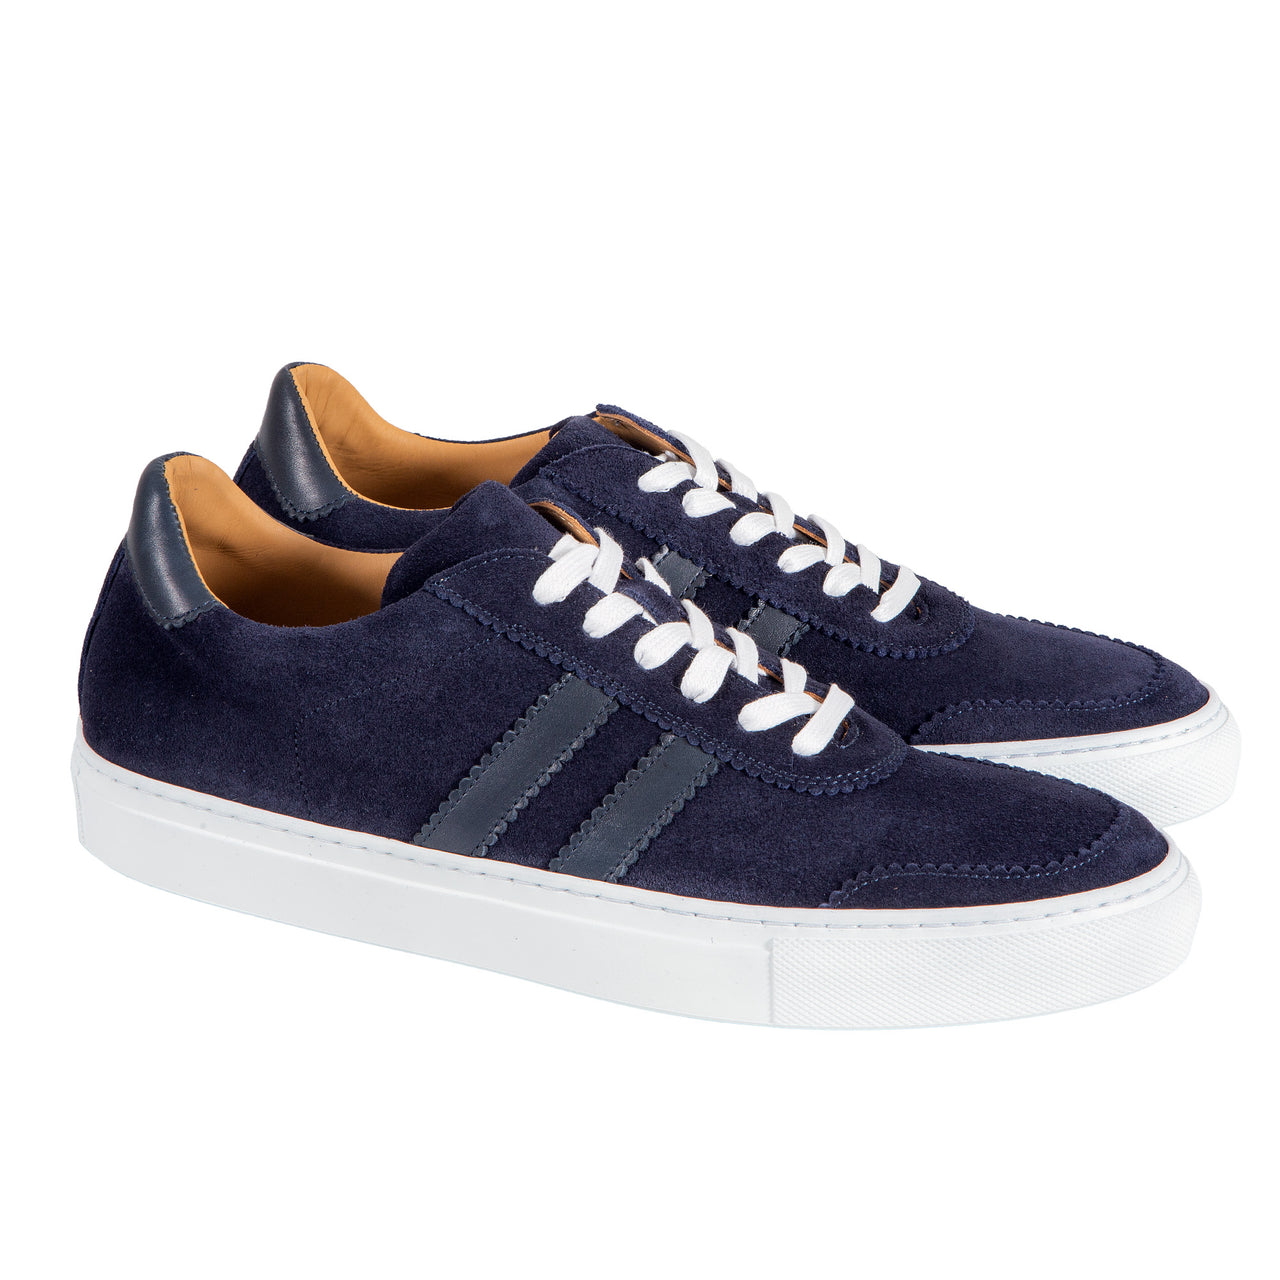 HENRY SARTORIAL Suede Leather Sneakers NAVY